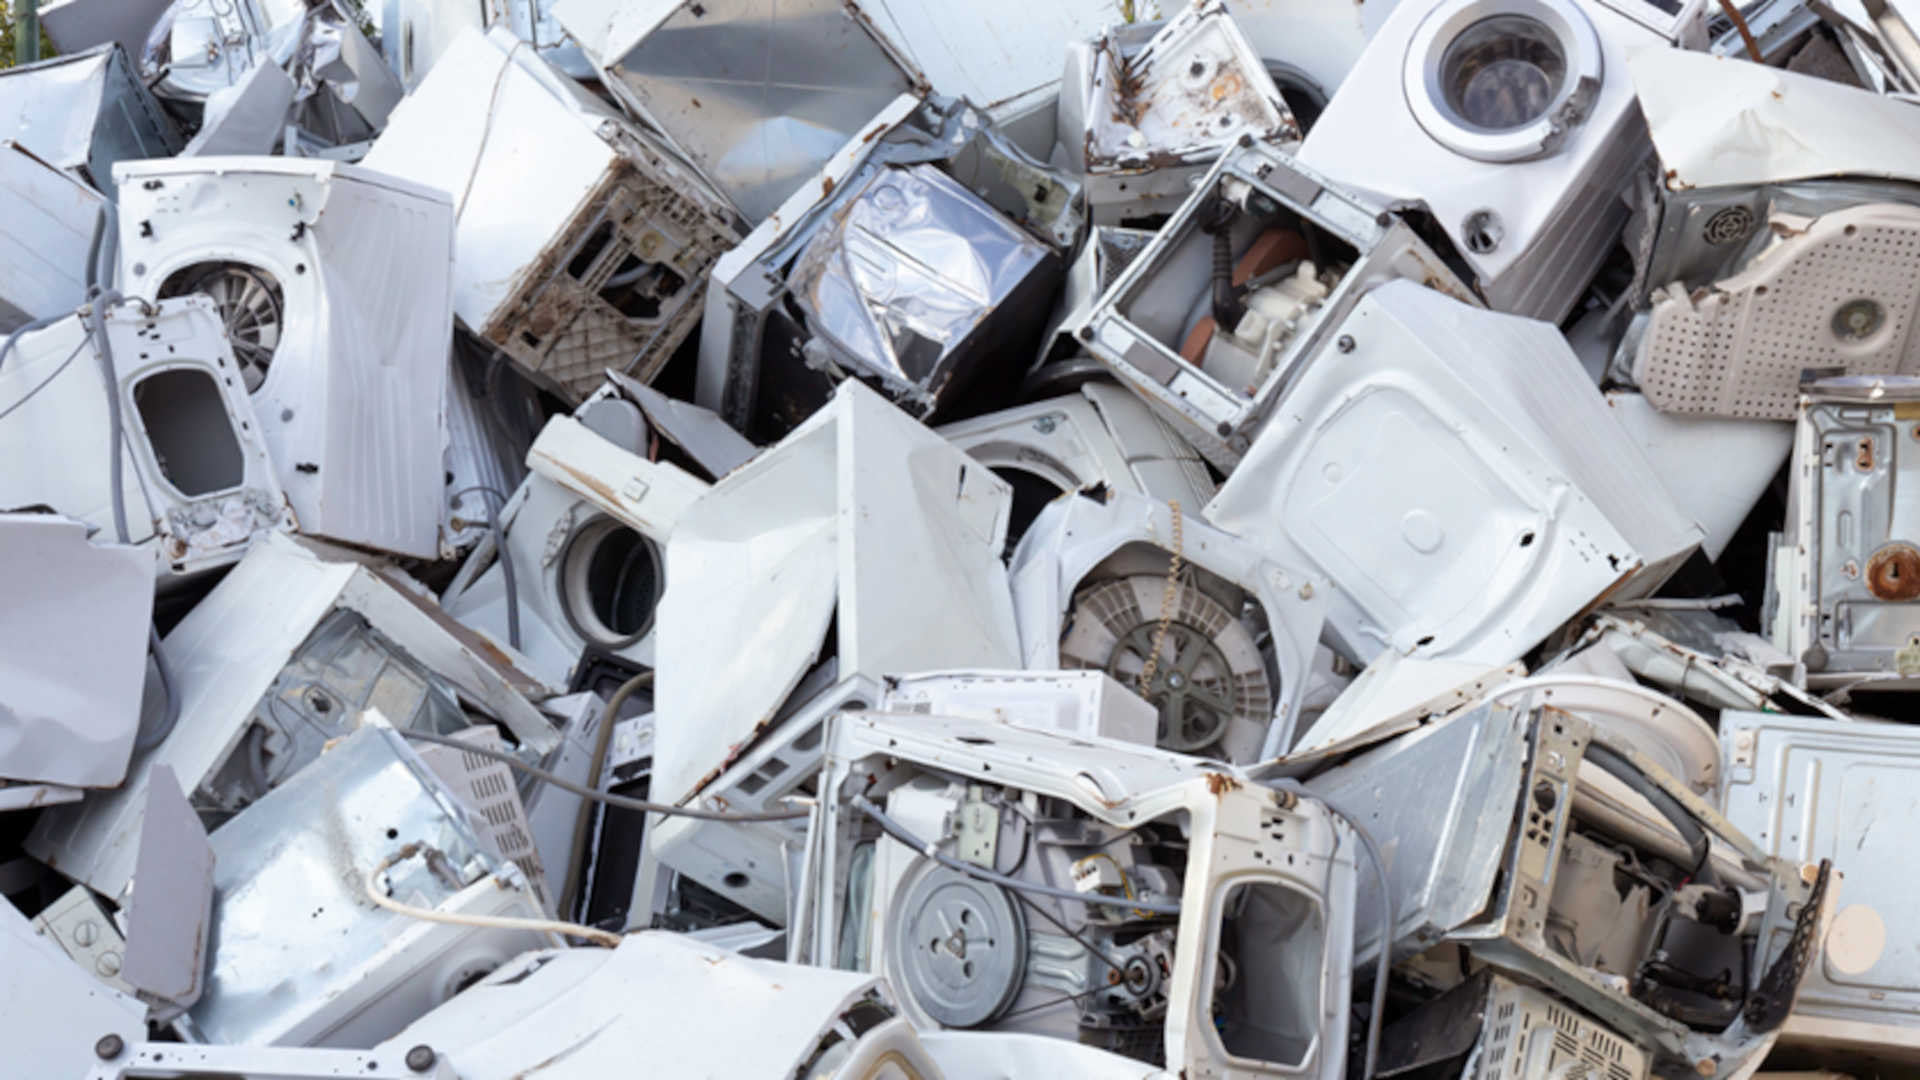 Whiteware disposal – pile of scrap white laundry machines ready for whiteware recycling.